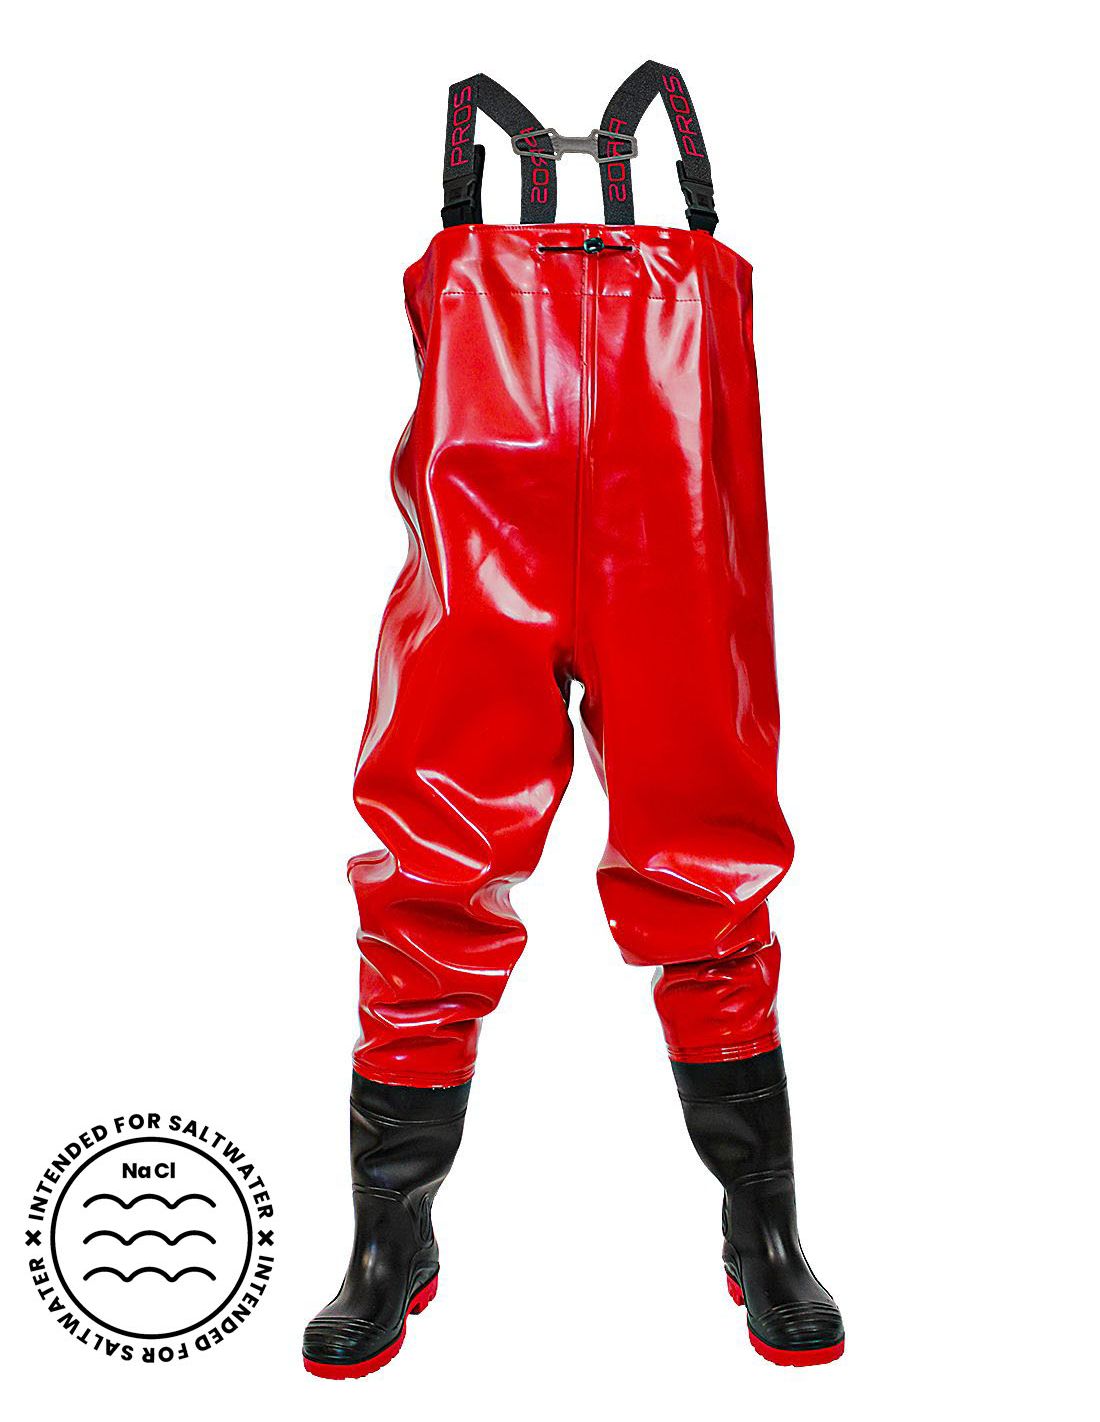 Chest Waders STRONG - Red - PROS